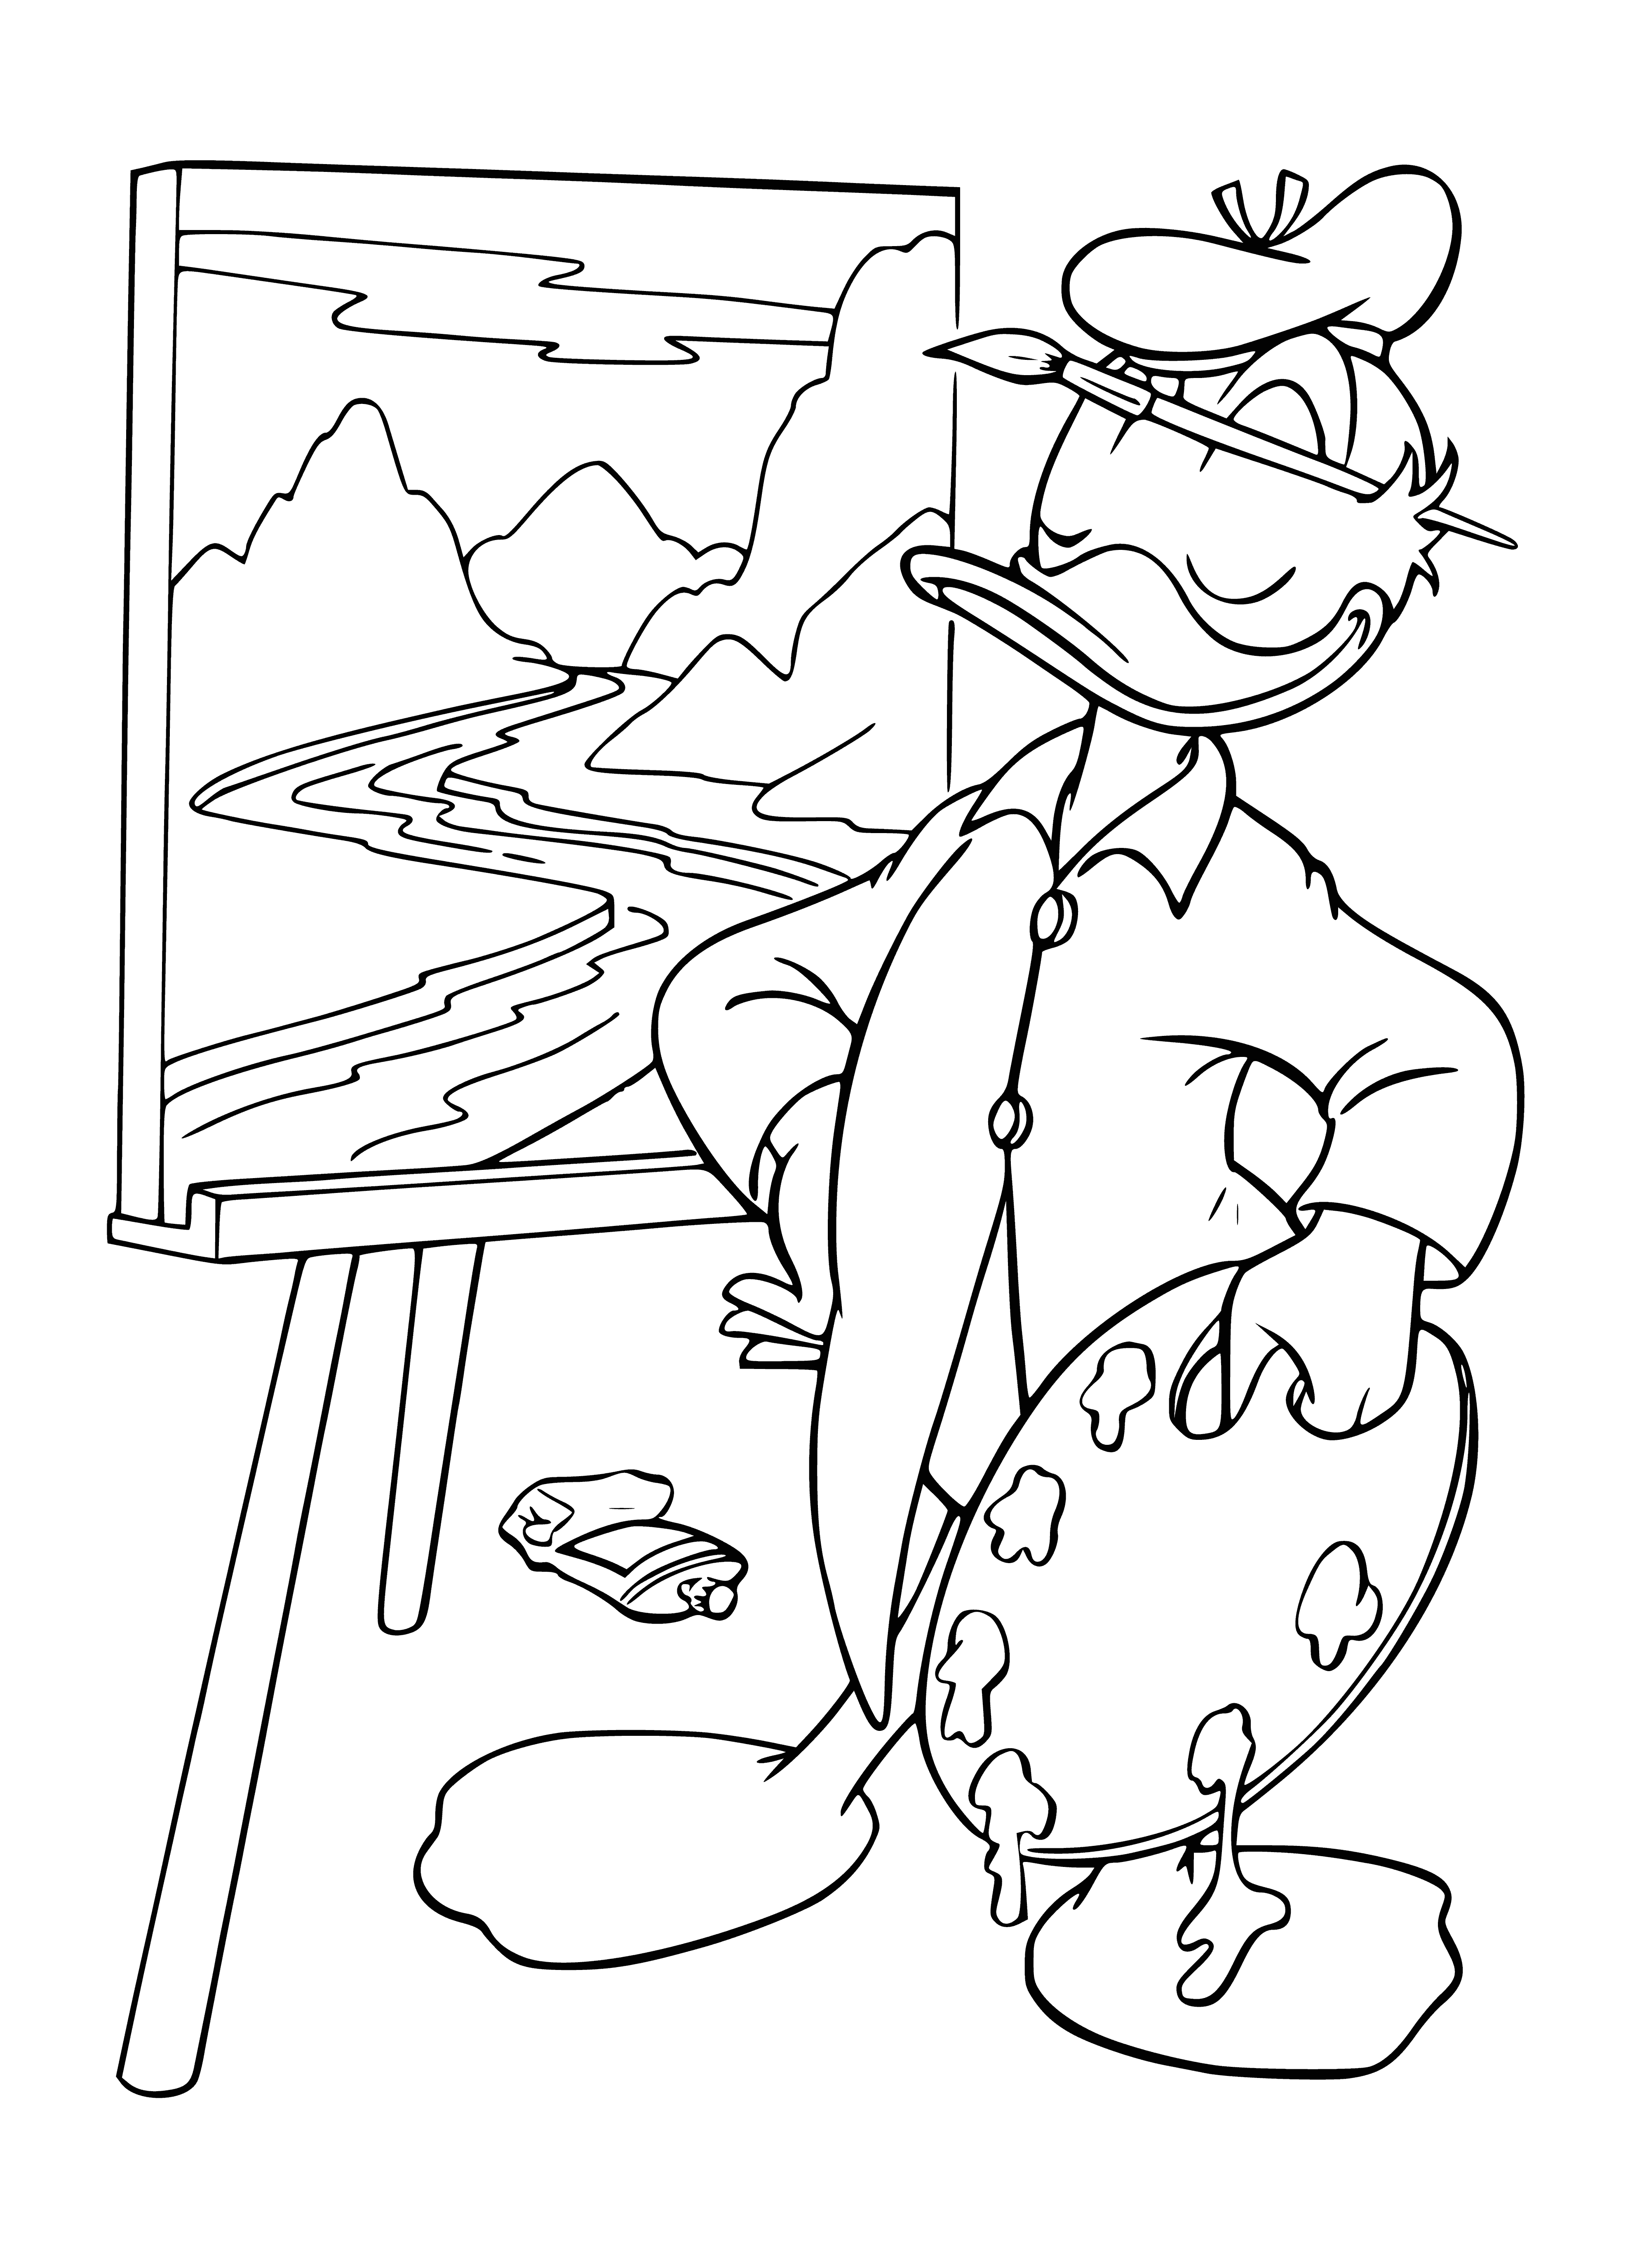 coloring page: Two mice stand in front of an easel; one holds a paintbrush, one a pencil. Brown & white and grey & white, both have paint on their tails.